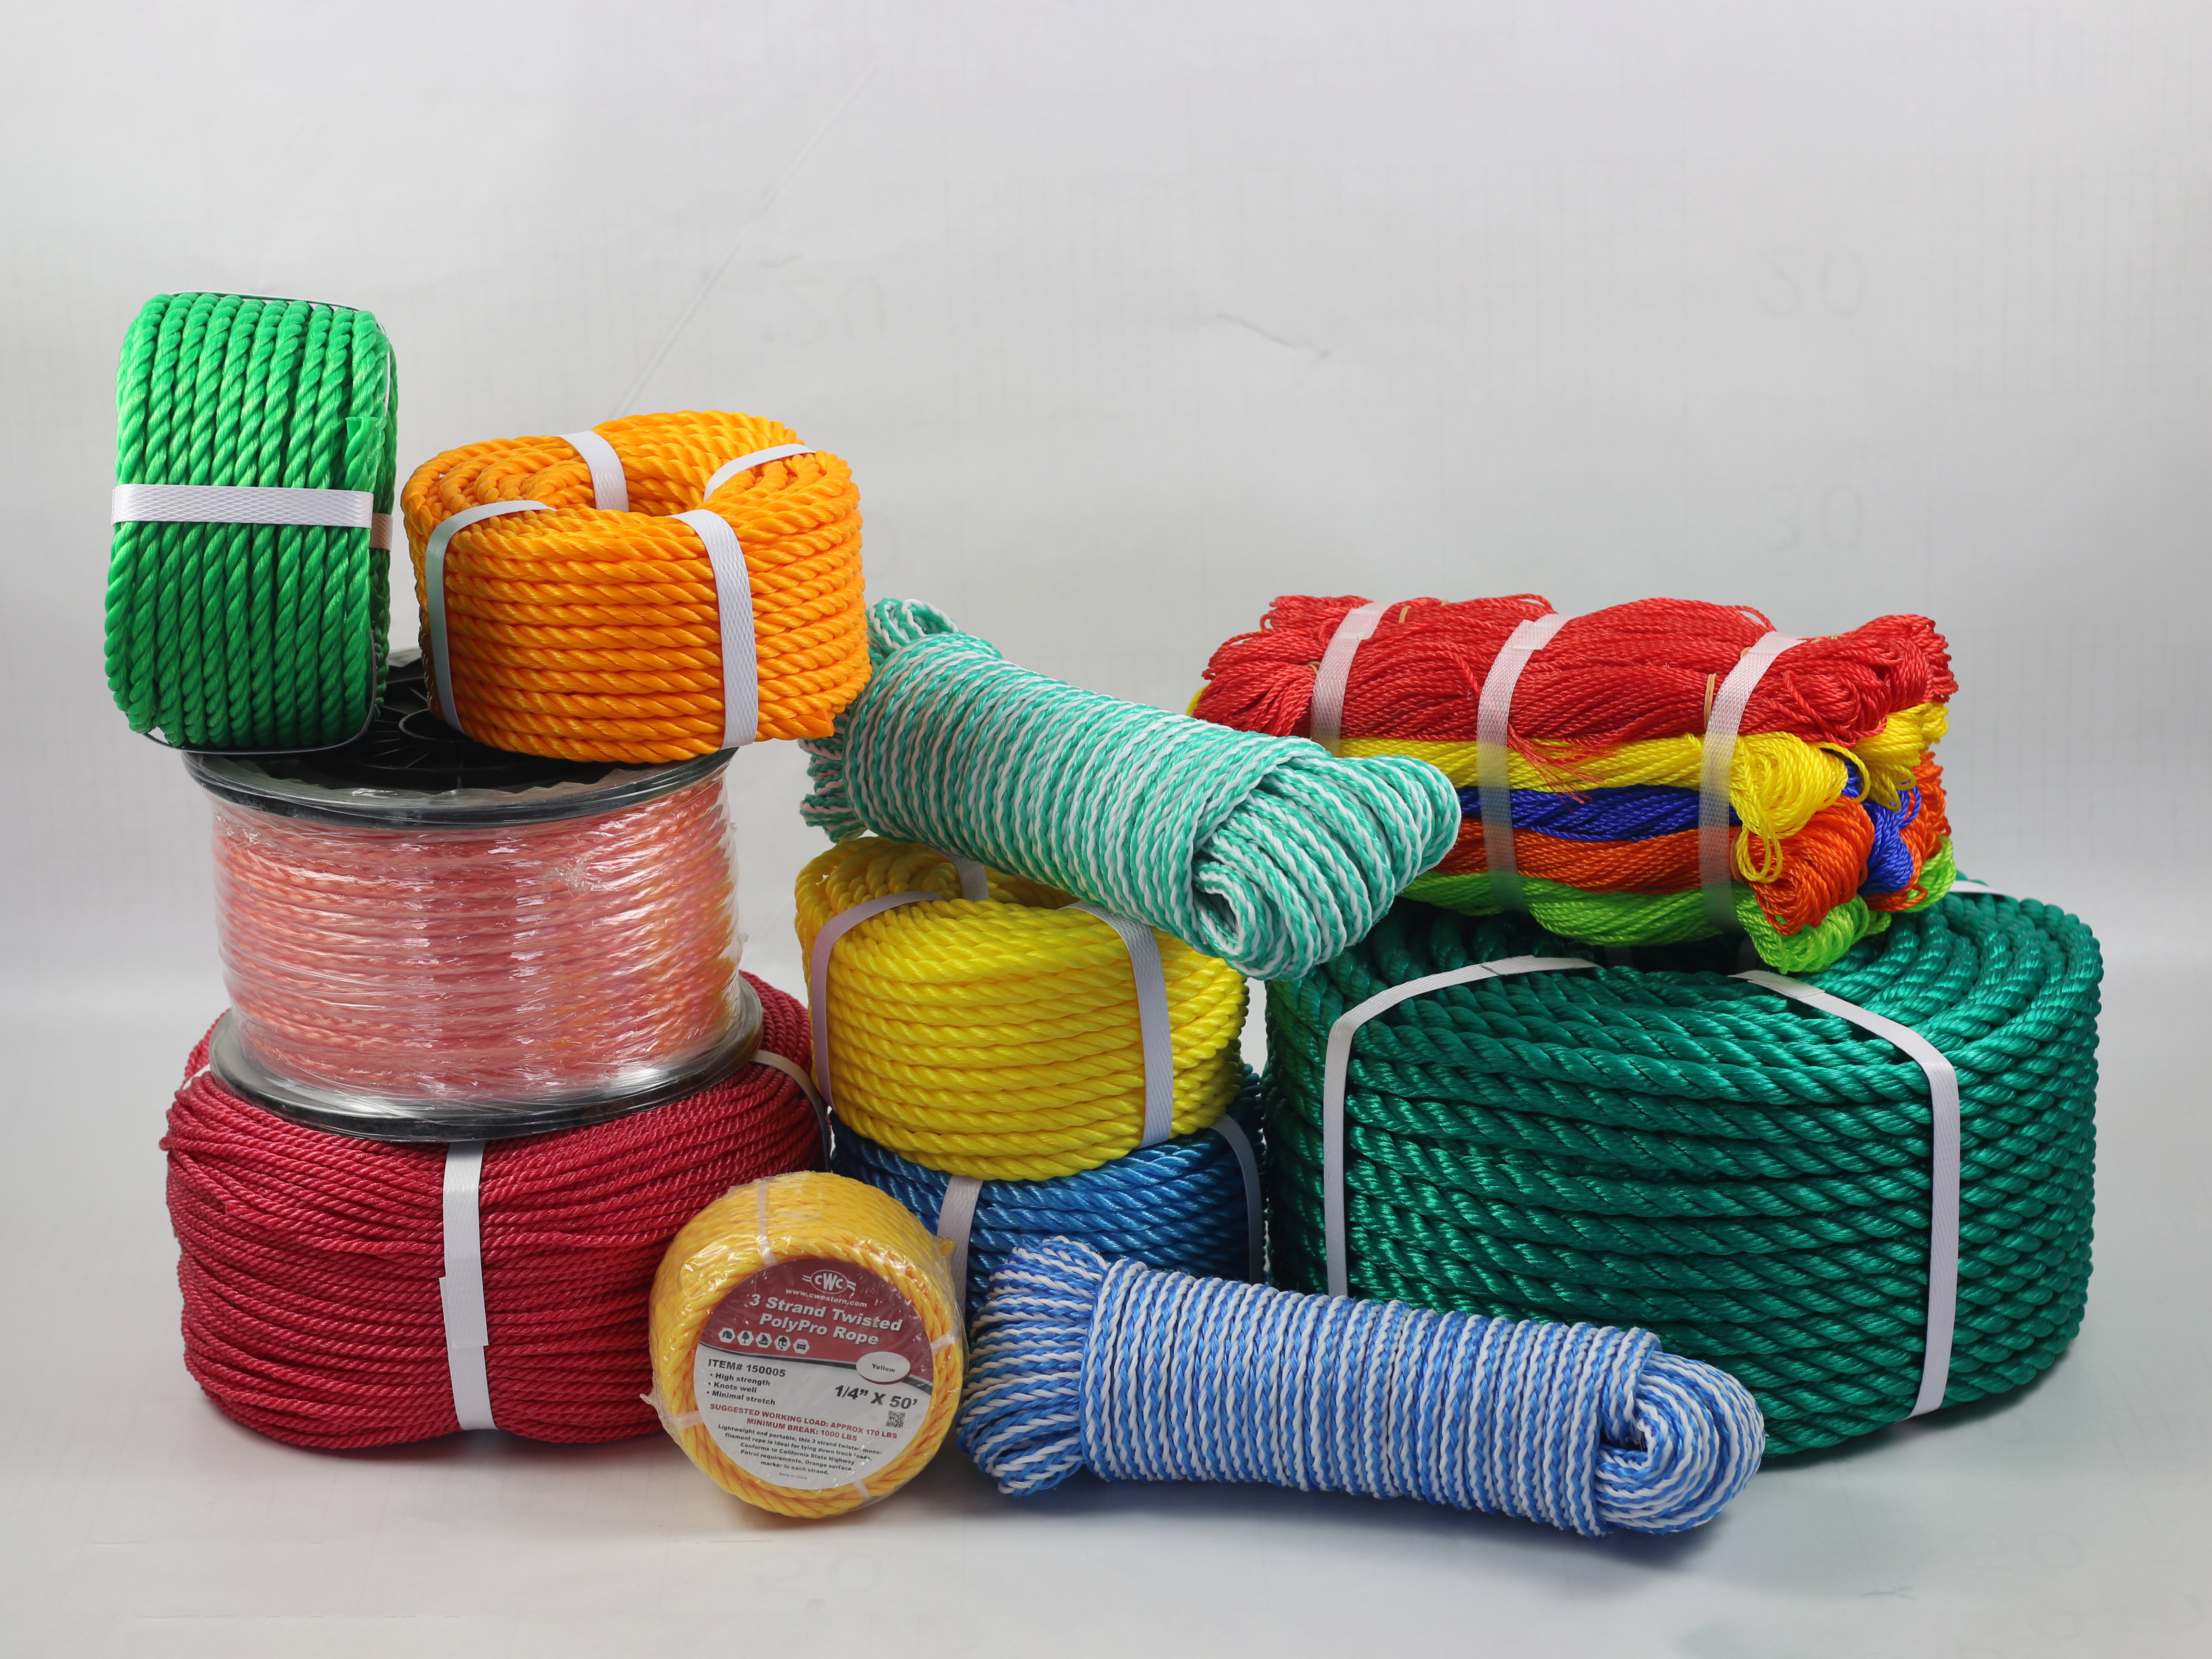 Rope - Net Making Supplies  Fishing & Net Supply – tagged